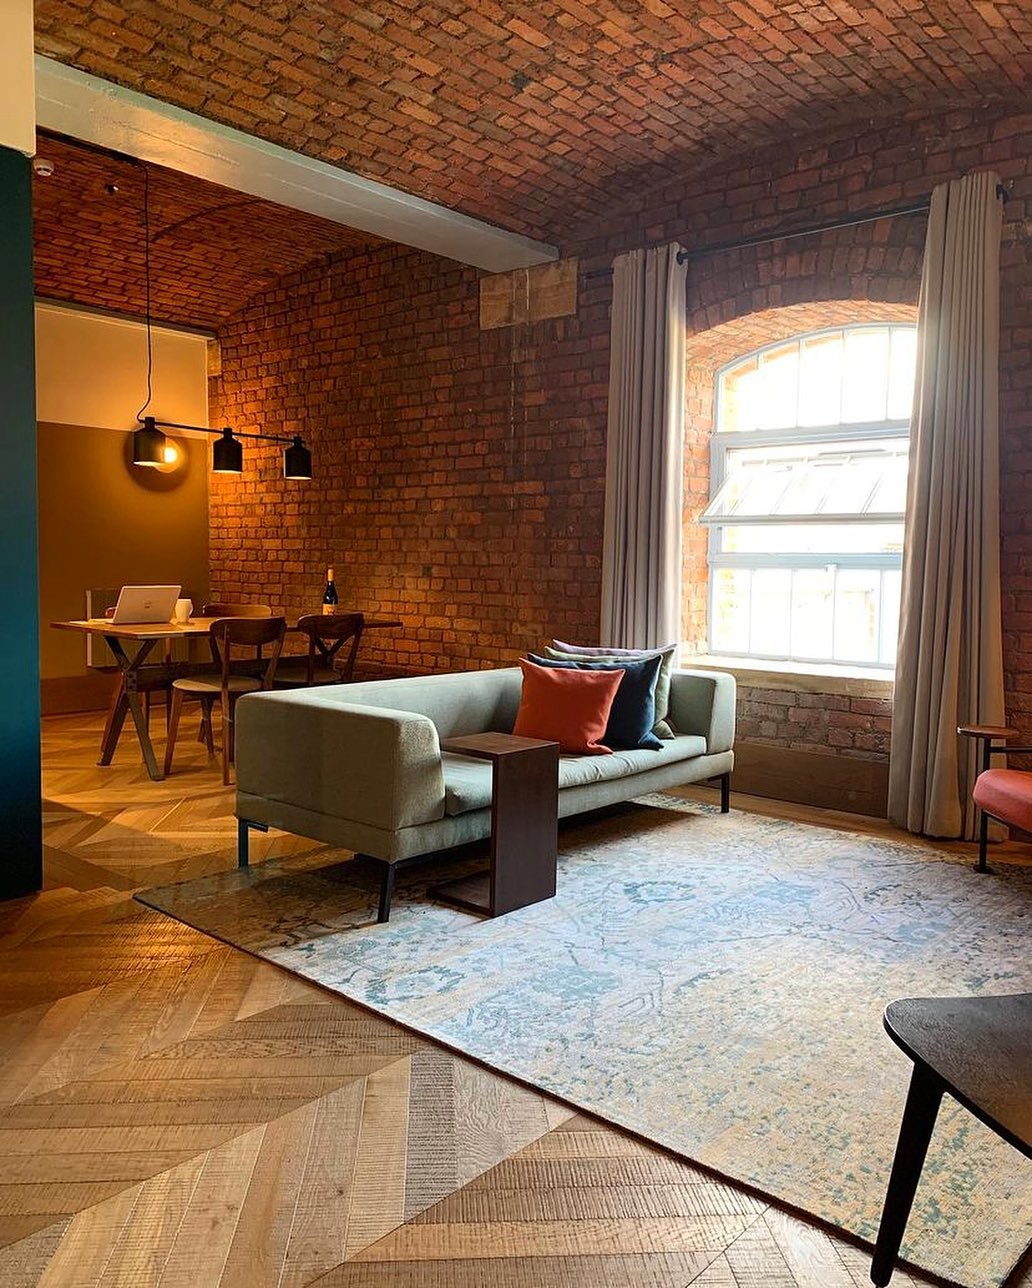 A swanky Manchester hotel is giving away hundreds of free rooms, The Manc